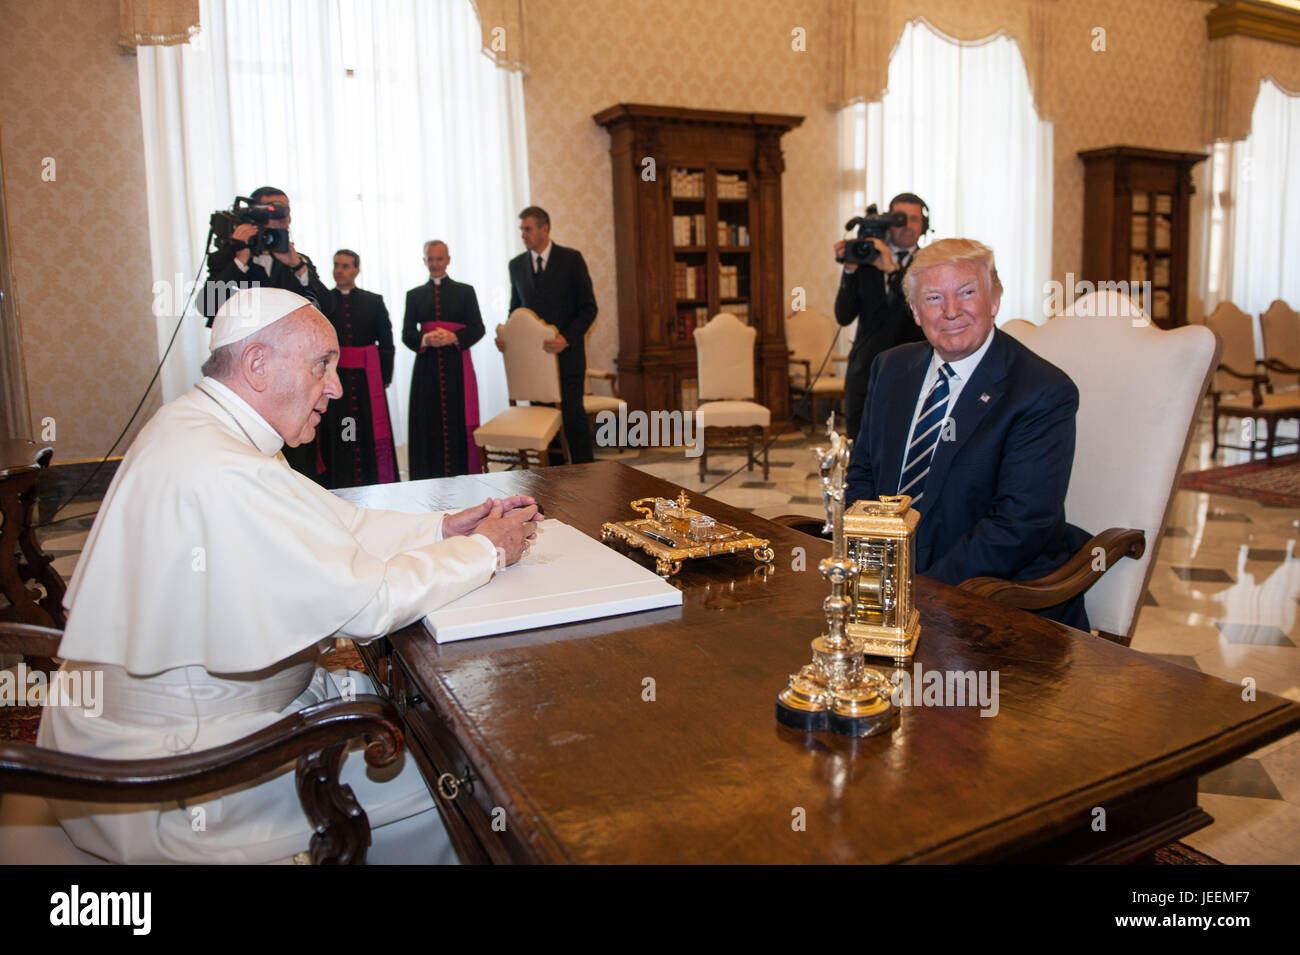 U.S. President Donald Trump, Melania Trump and Ivanka Trump meet with Pope  Francis at the Vatican Featuring: Donald Trump, Pope Francis Where: Rome,  Italy When: 24 May 2017 Credit: IPA/WENN.com **Only available